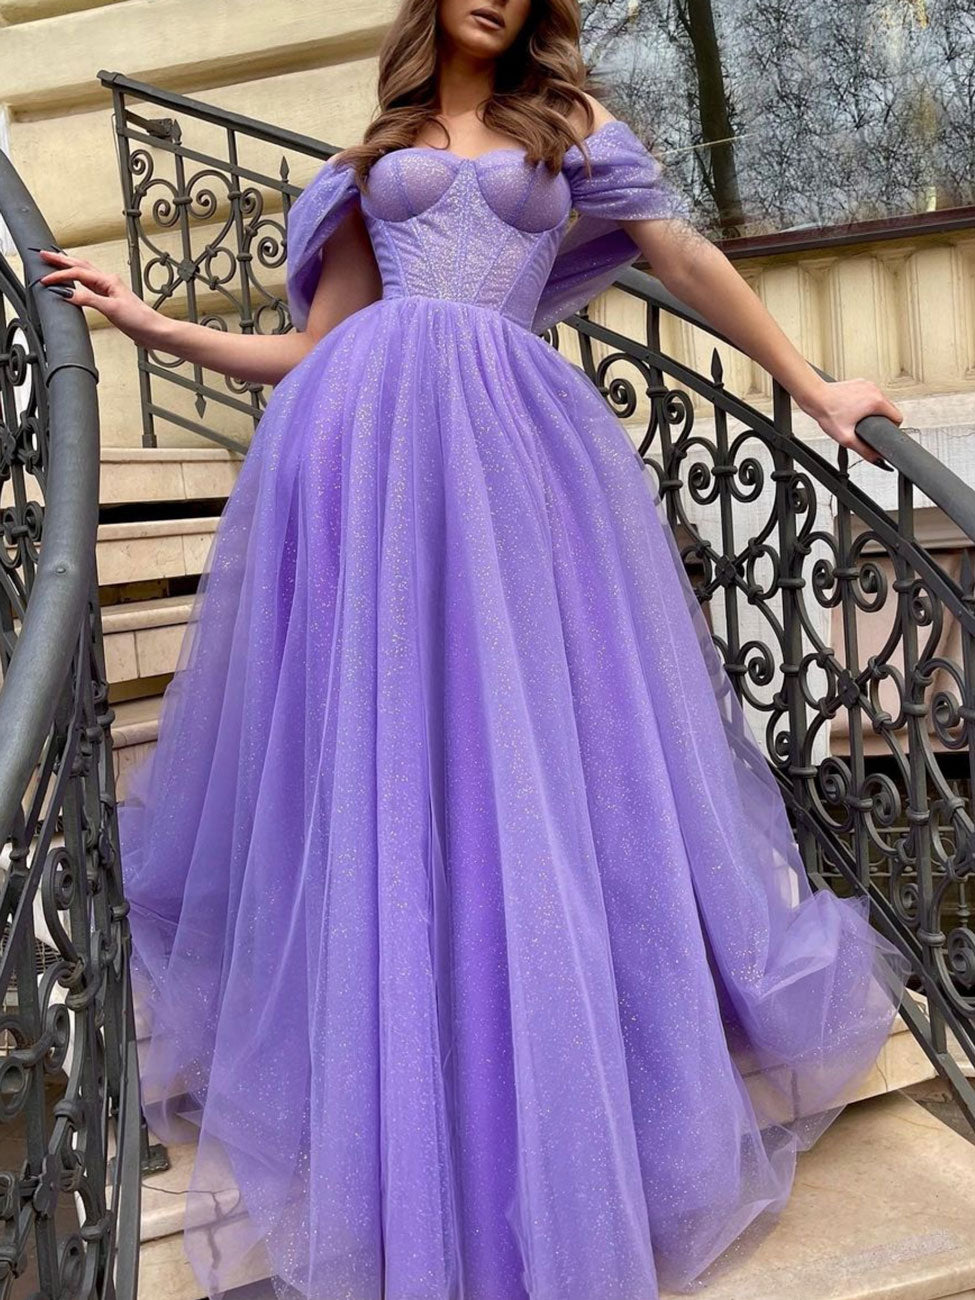 Off the shoulder tulle long floor length gown in lilac purple or